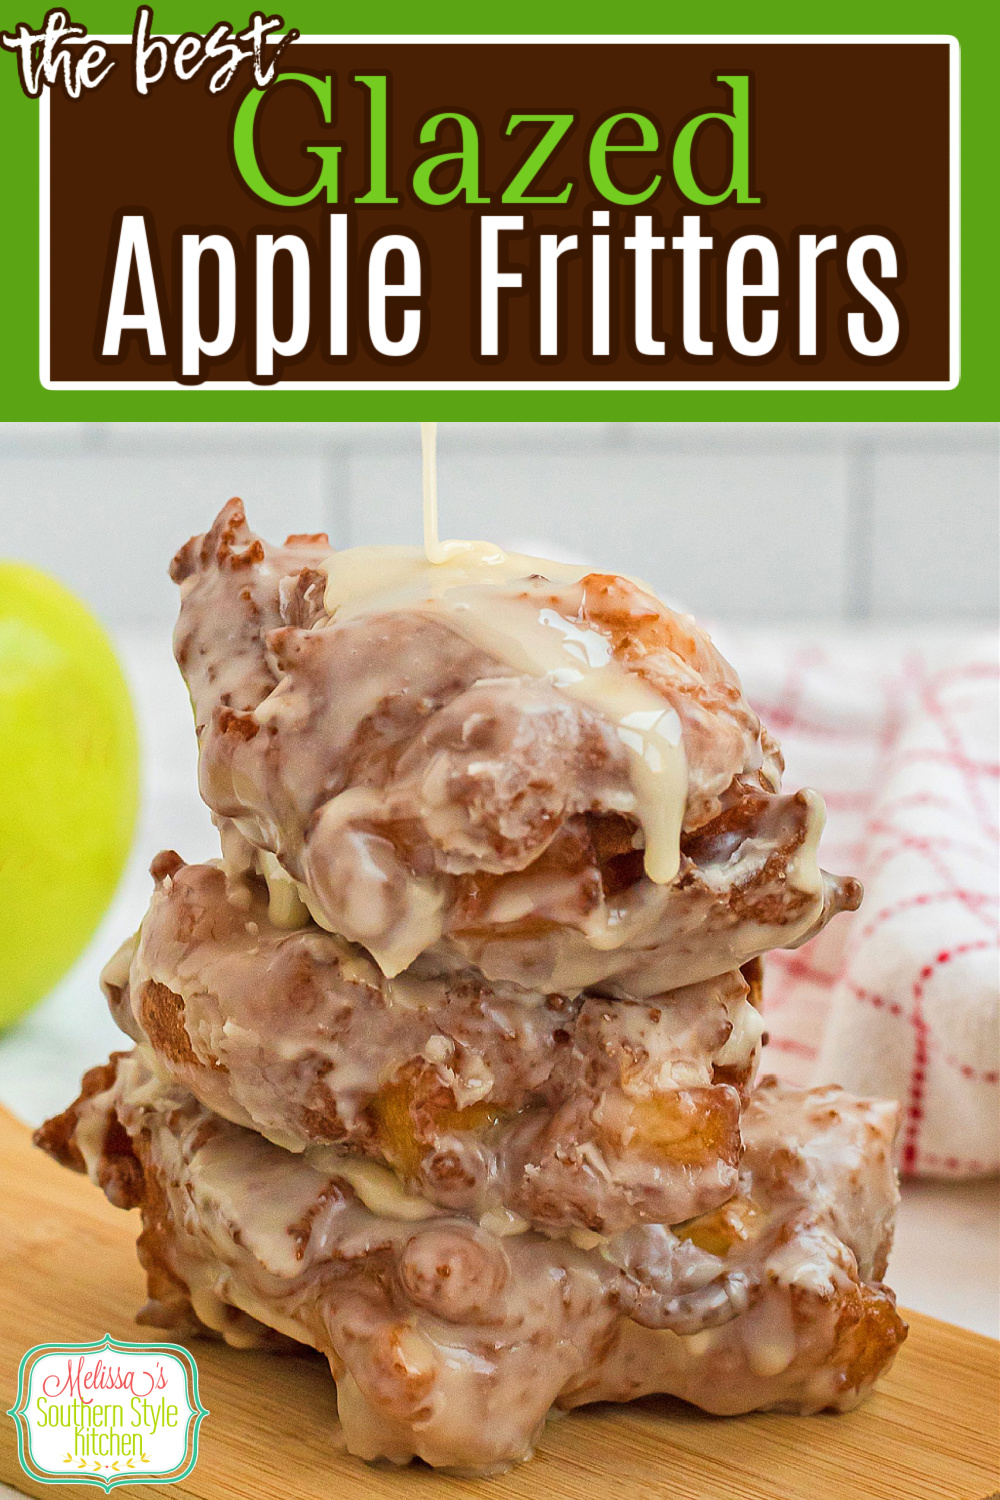 These Glazed Apple Fritters are perfectly fluffy on the inside and crispy on the outside with a sweet vanilla glaze that's next level. #applefritters #glazedapplefritters #apples #appledesserts #southernapplerecipes #grannysmithapples #applerecipes via @melissasssk